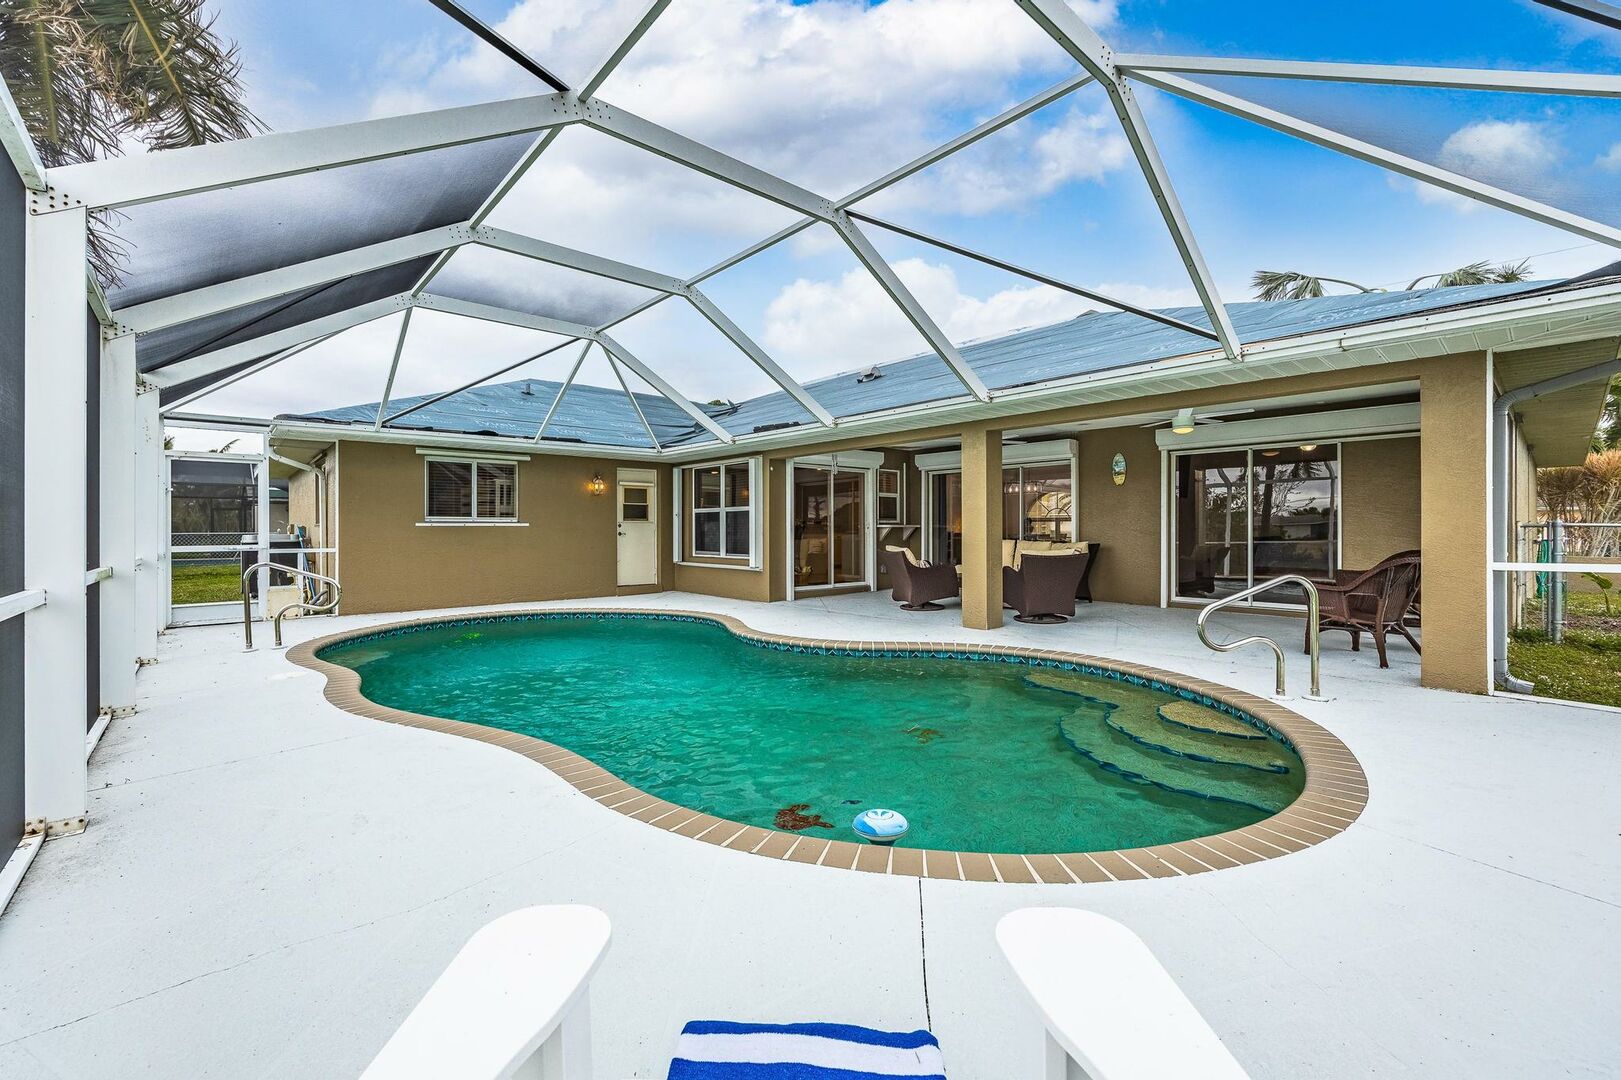 Private pool vacation rental in Cape Coral, Florida